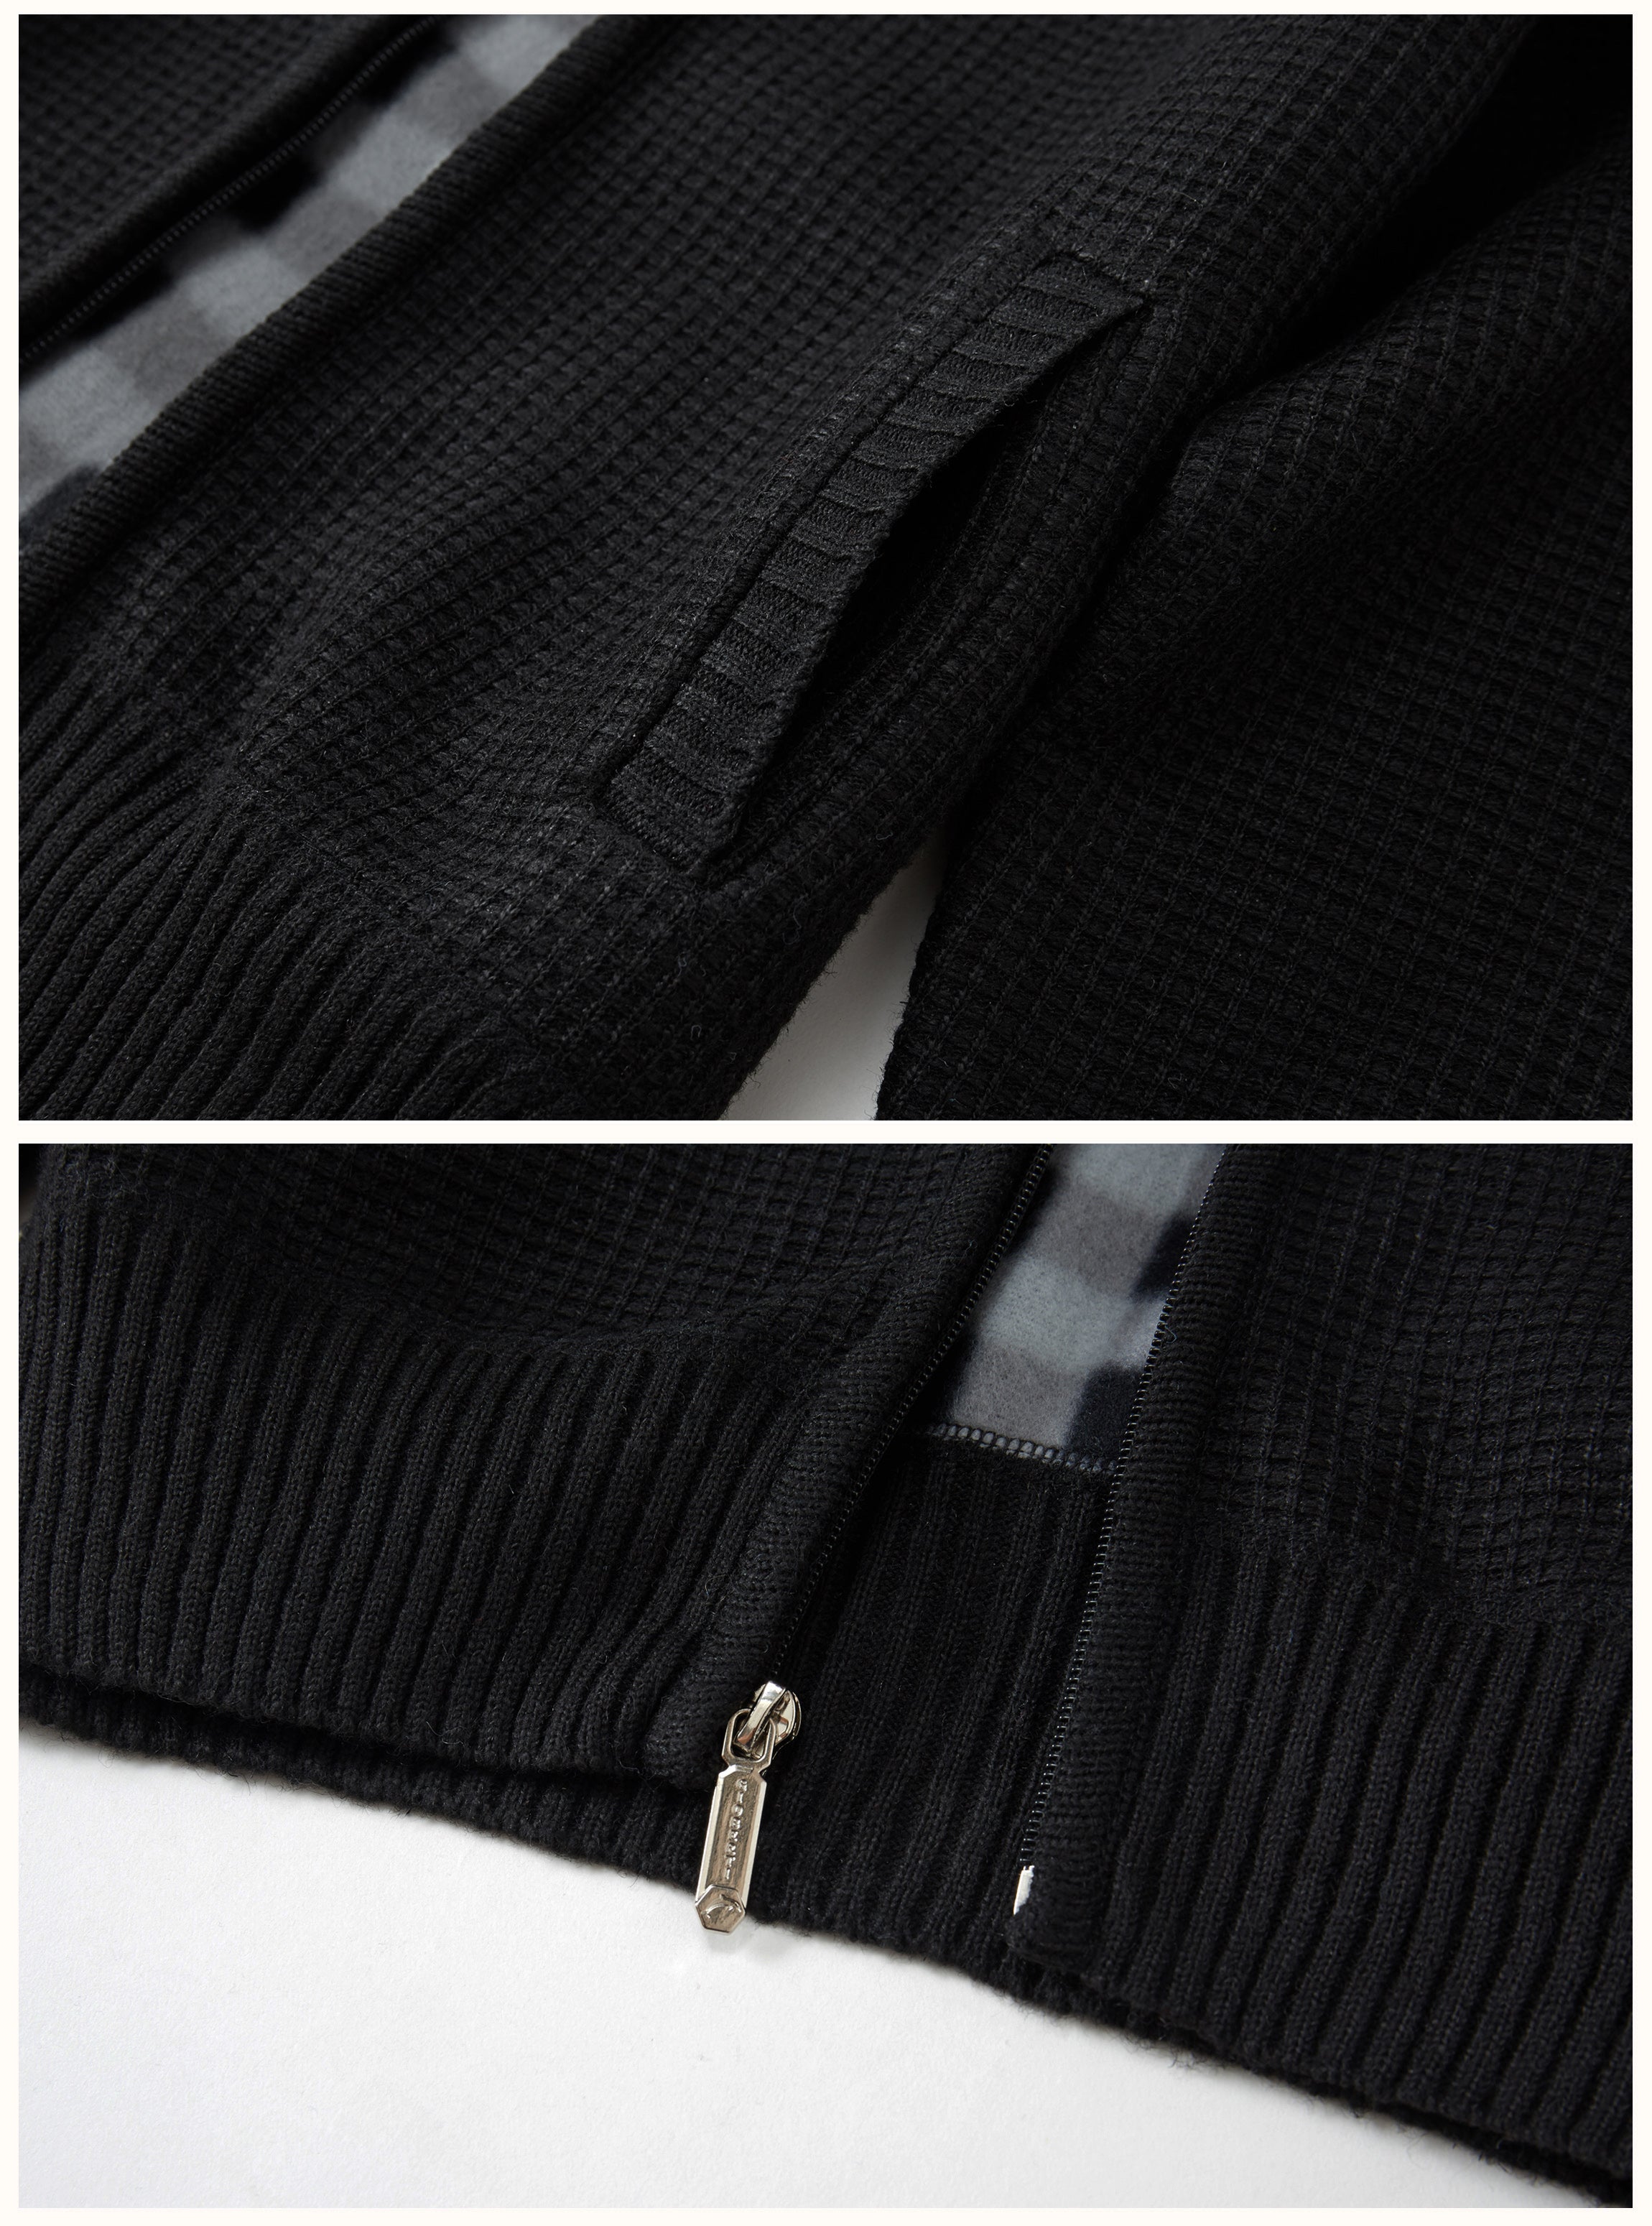 title:Gioberti Men's Black Knitted Regular Fit Full Zip Cardigan Sweater with Soft Brushed Flannel Lining;color:Black